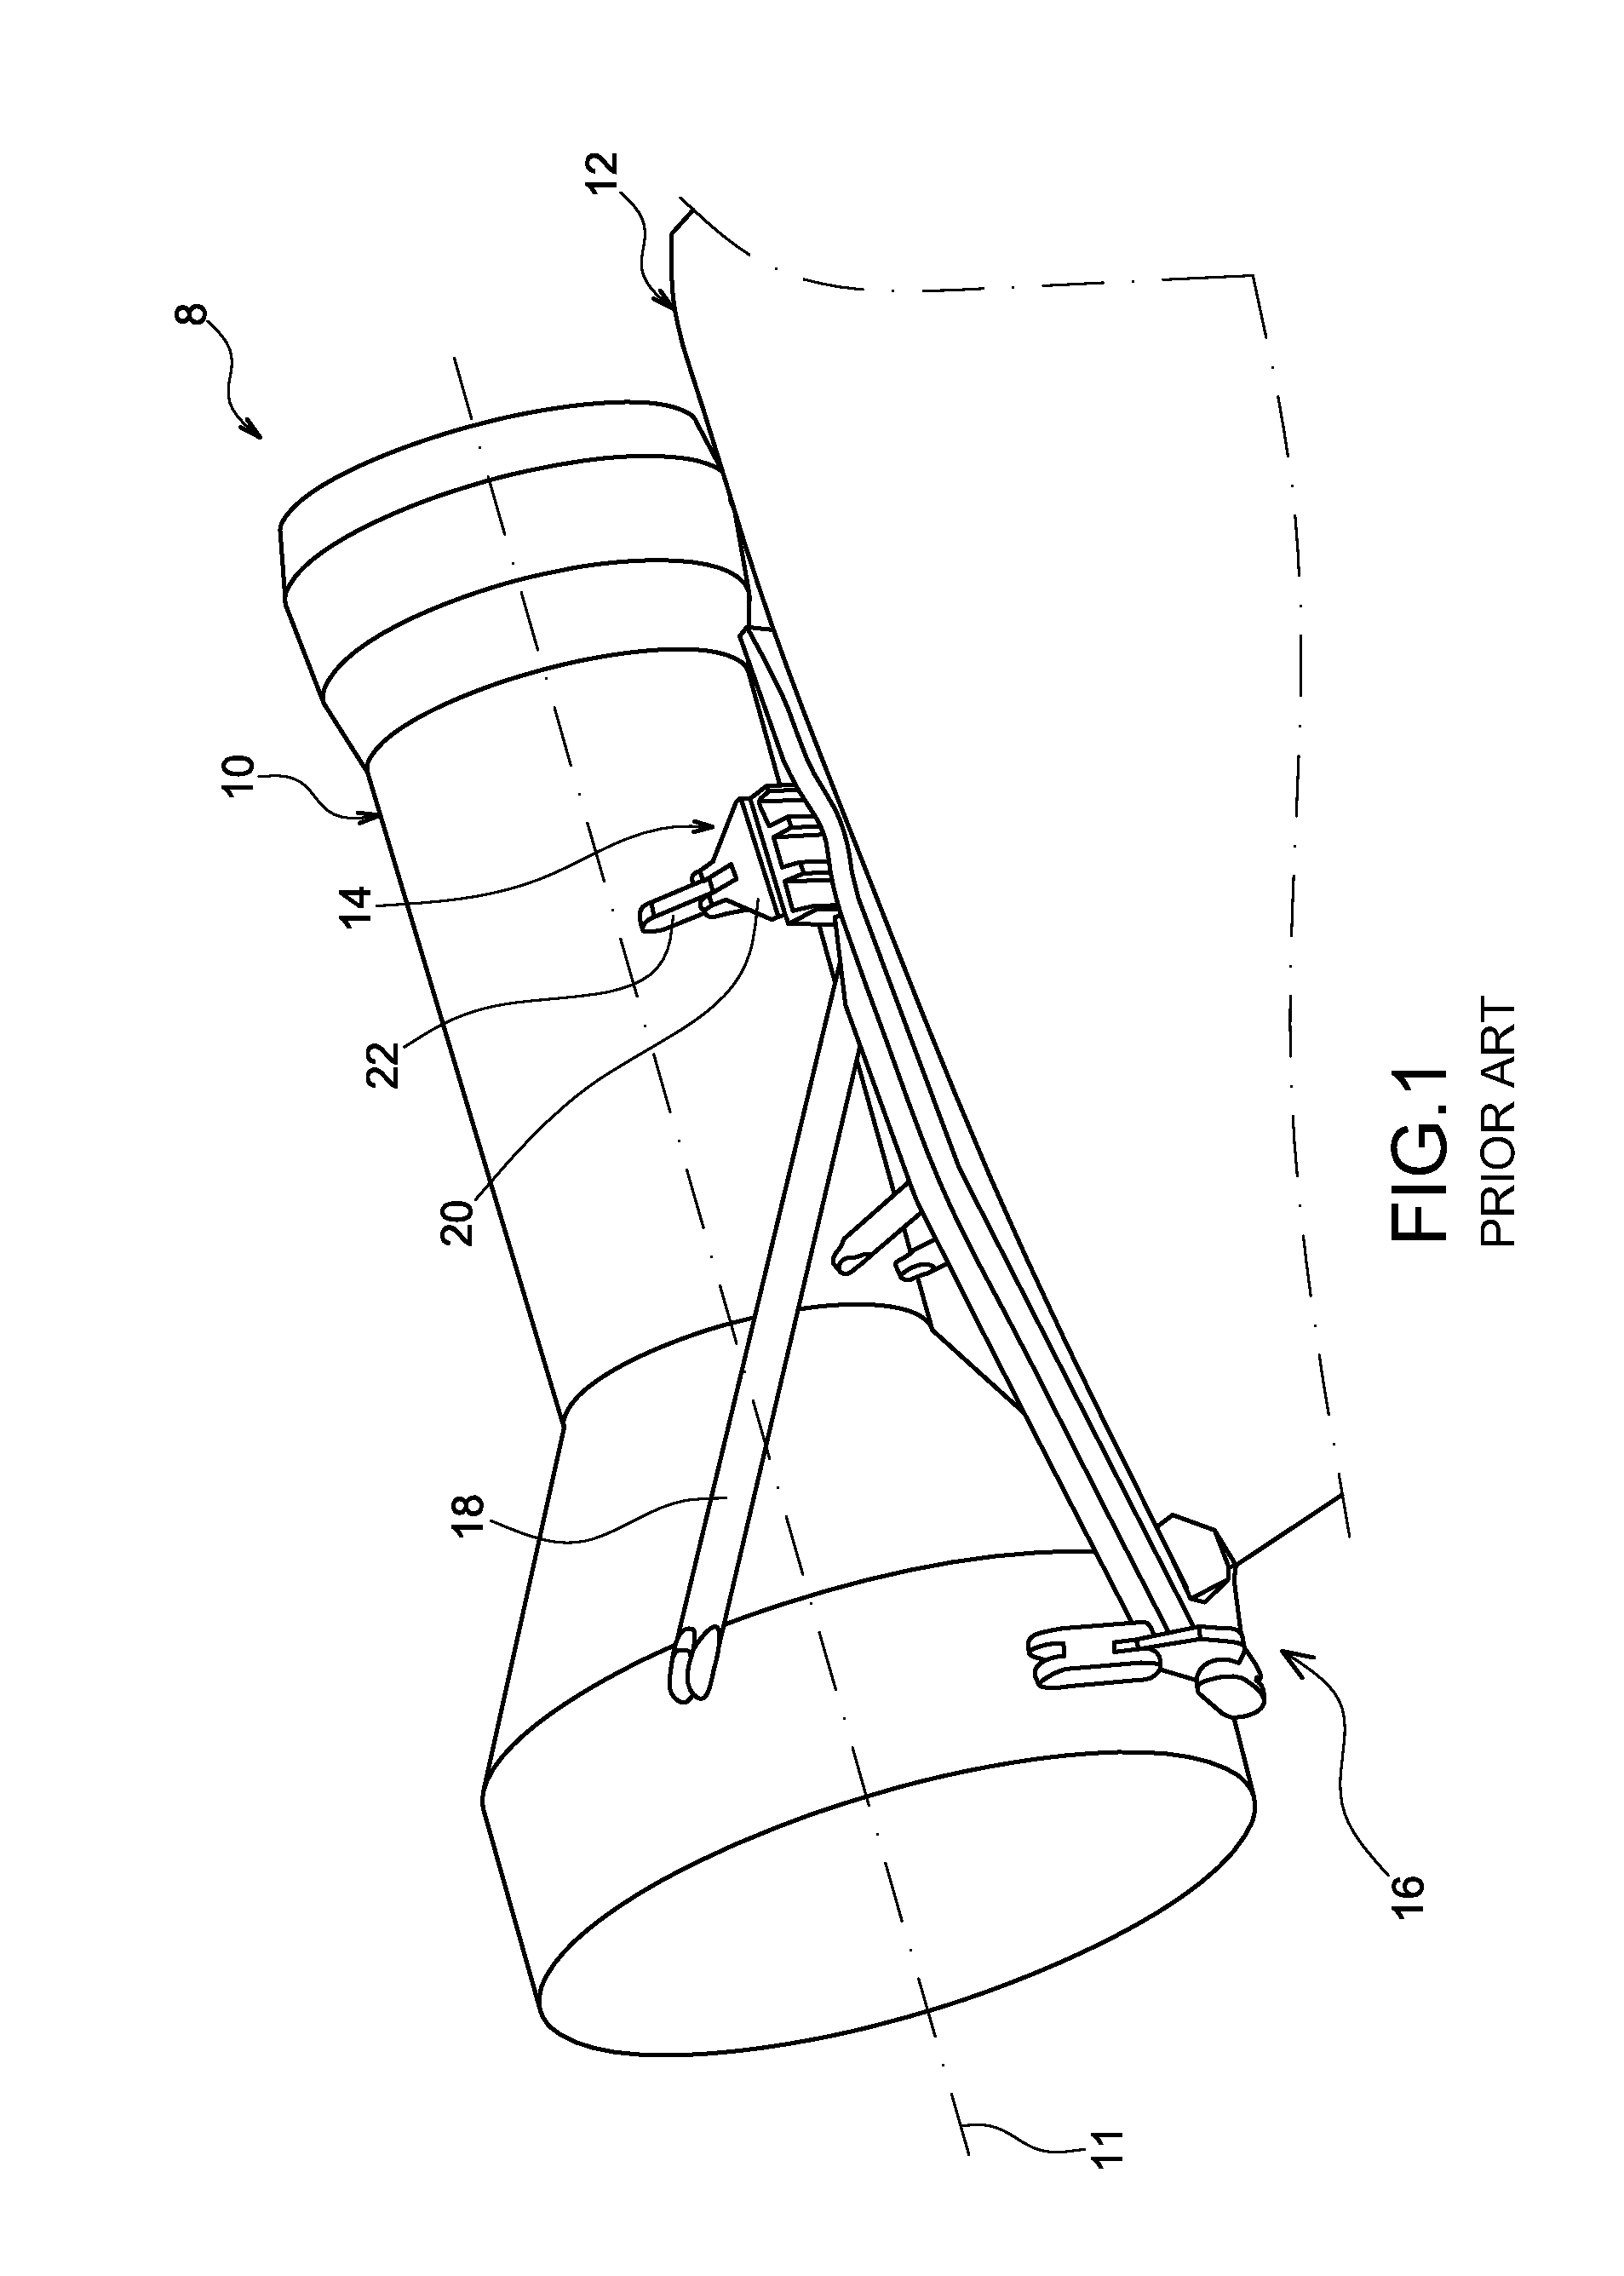 Boomerang link with vibration filtering ability and aircraft engine mount provided with such link